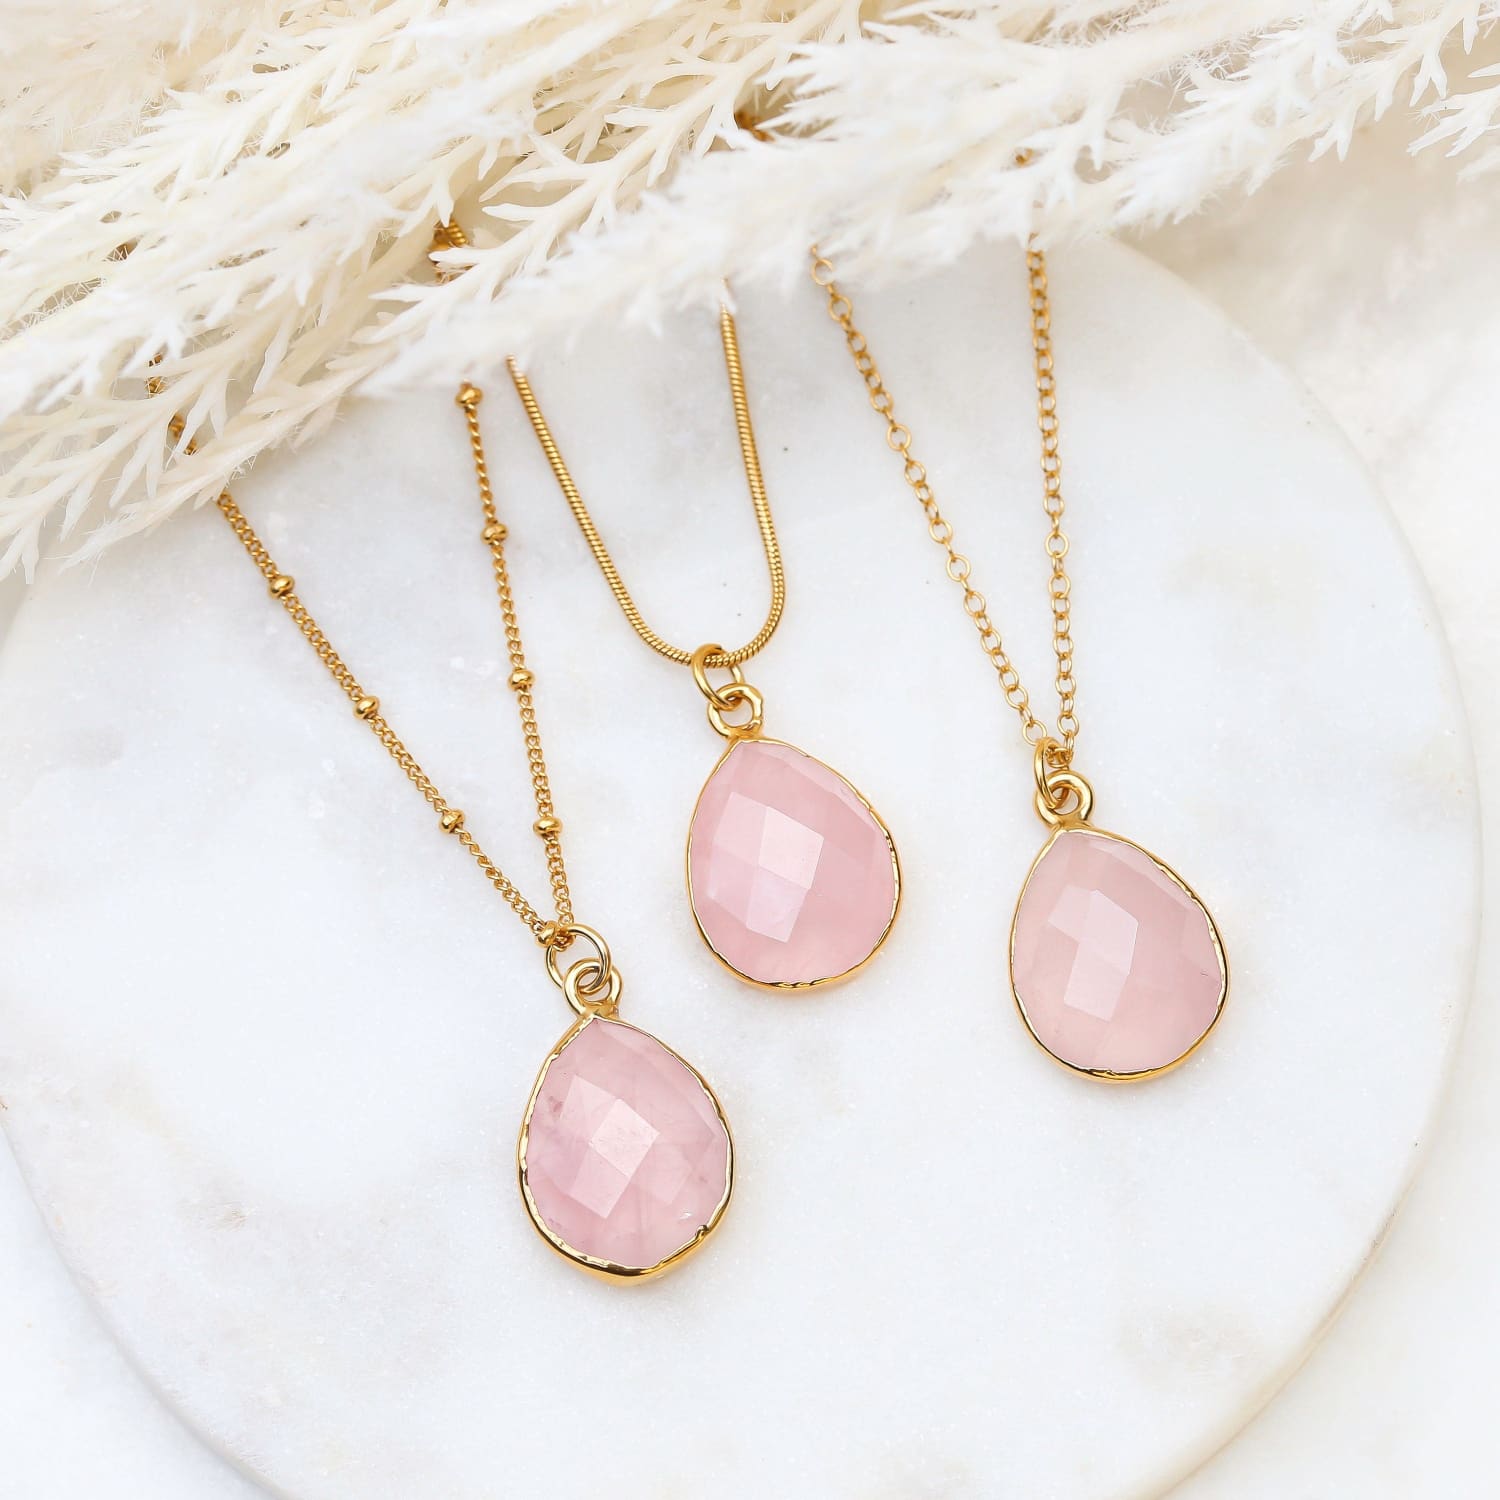 Crystal Pendant Rose Quartz Ladies Necklace For Daily Use, Gift, Party Wear  Gender: Children at Best Price in Nagapattinam | Arun Fancy